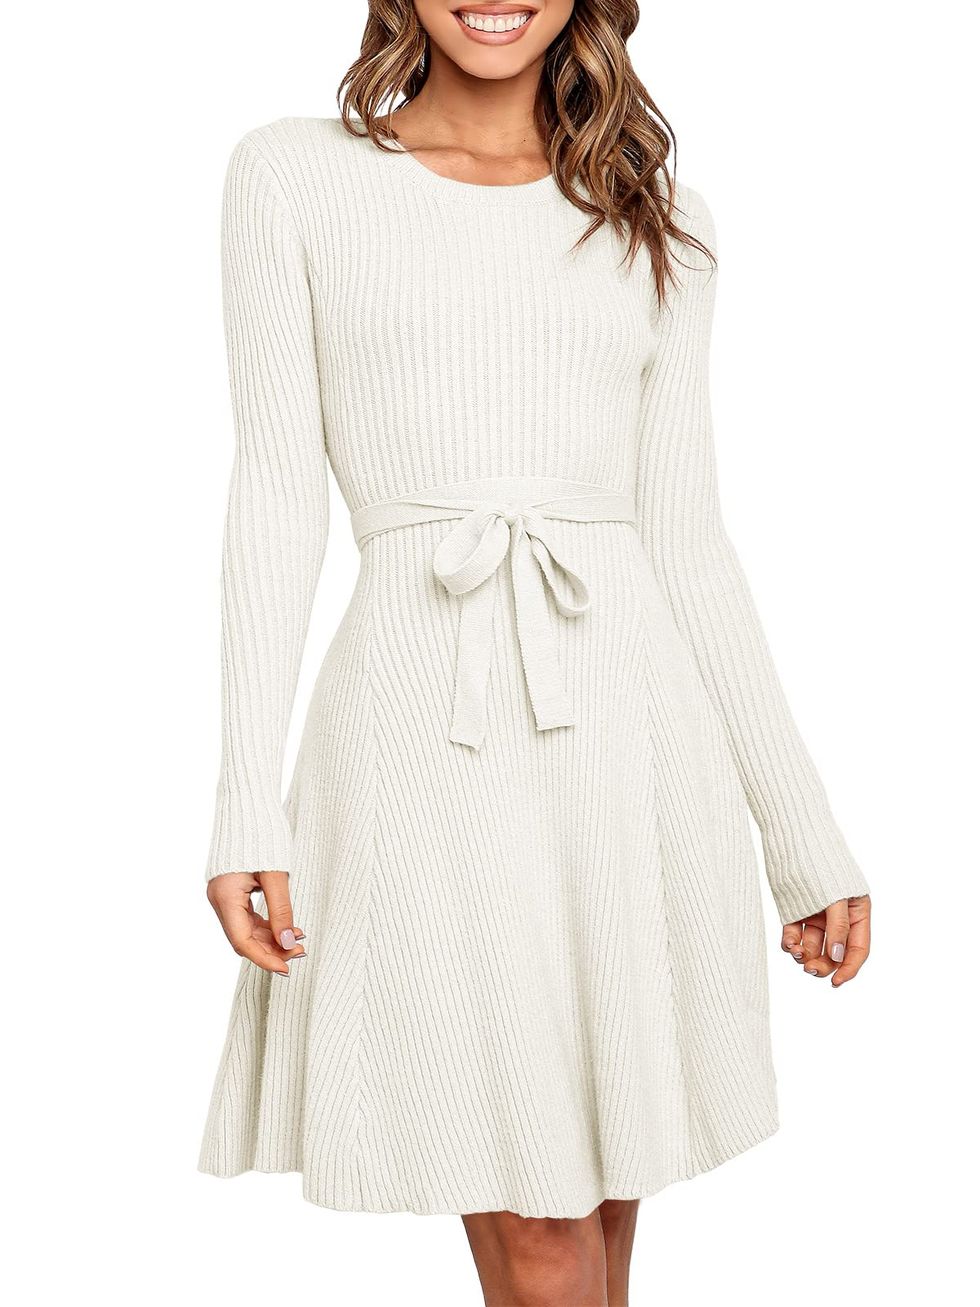 23 Fall Dresses That'll Carry You All the Way Through the Season